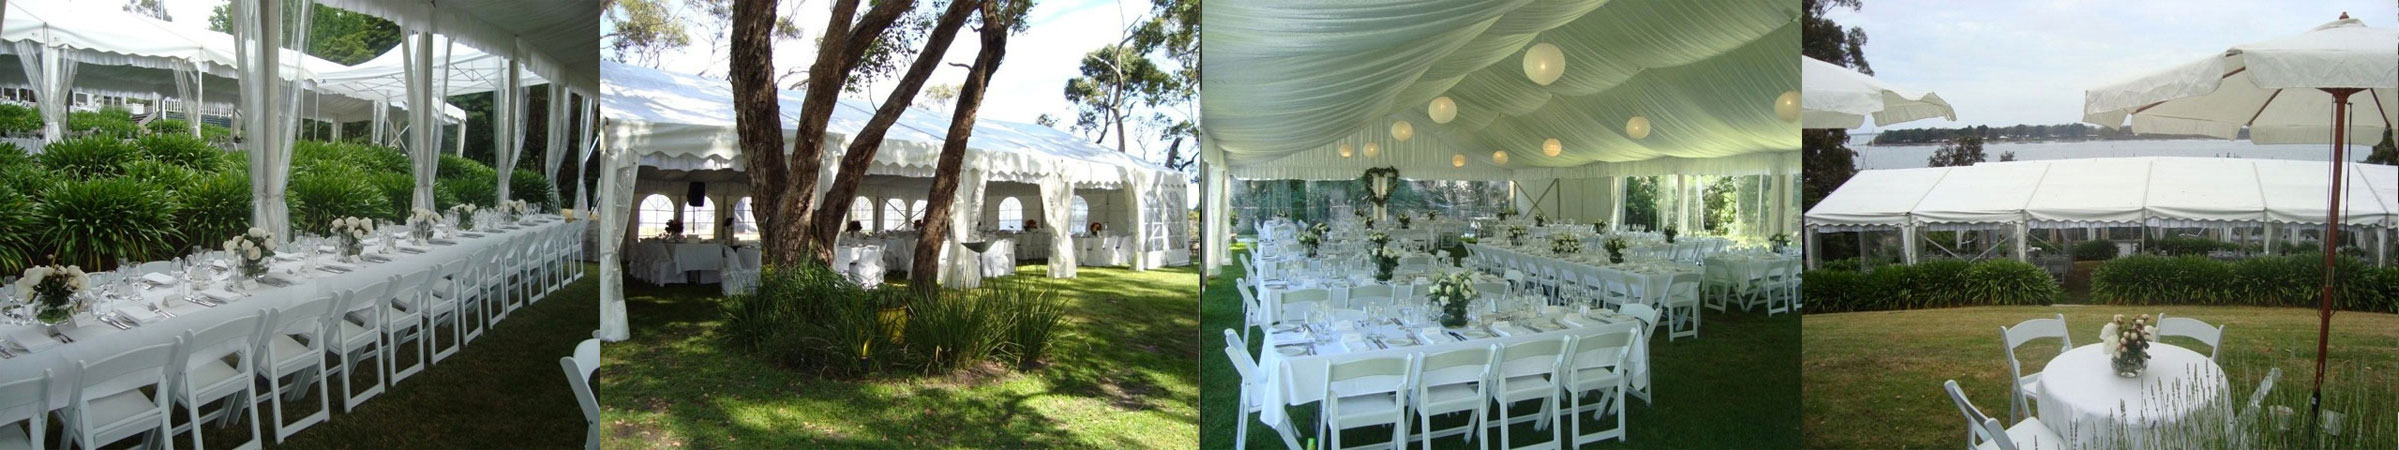 Gippsland Marquee Structures Event Party Hire Melbourne Victoria Australia